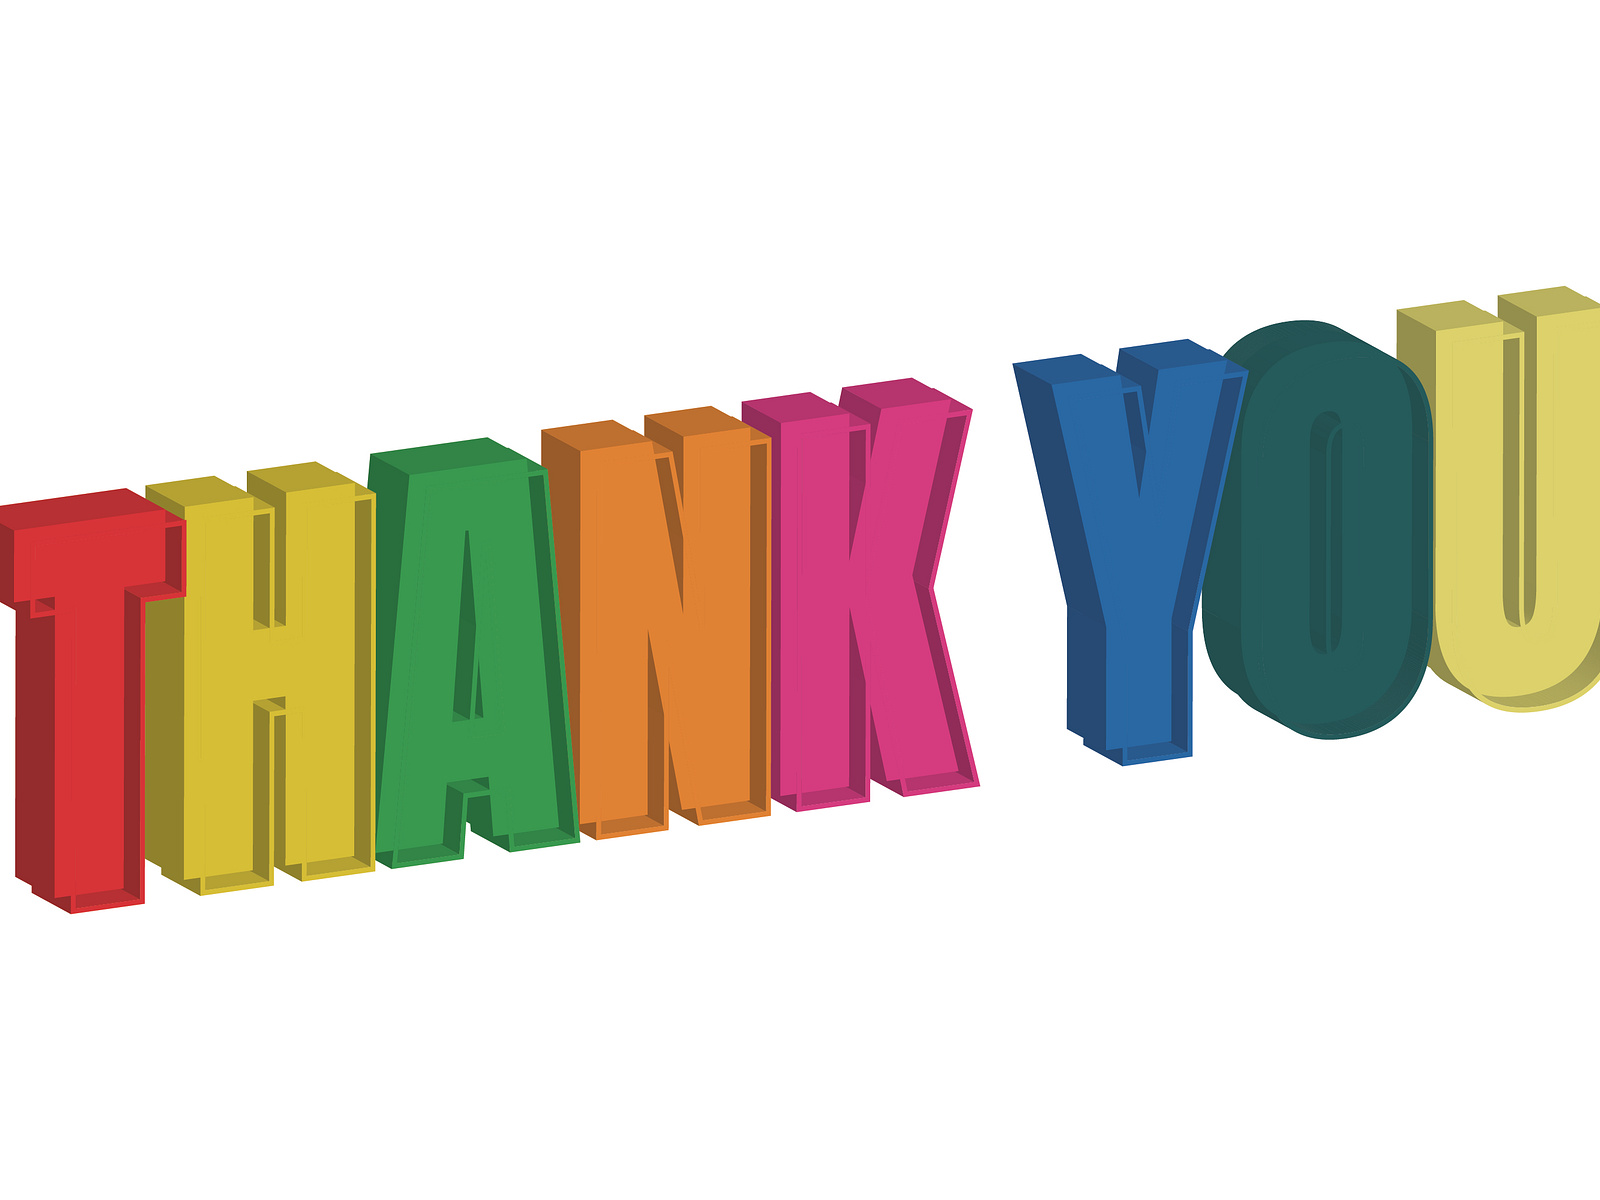 3D Thank You Typography by Rameen Tabassum on Dribbble